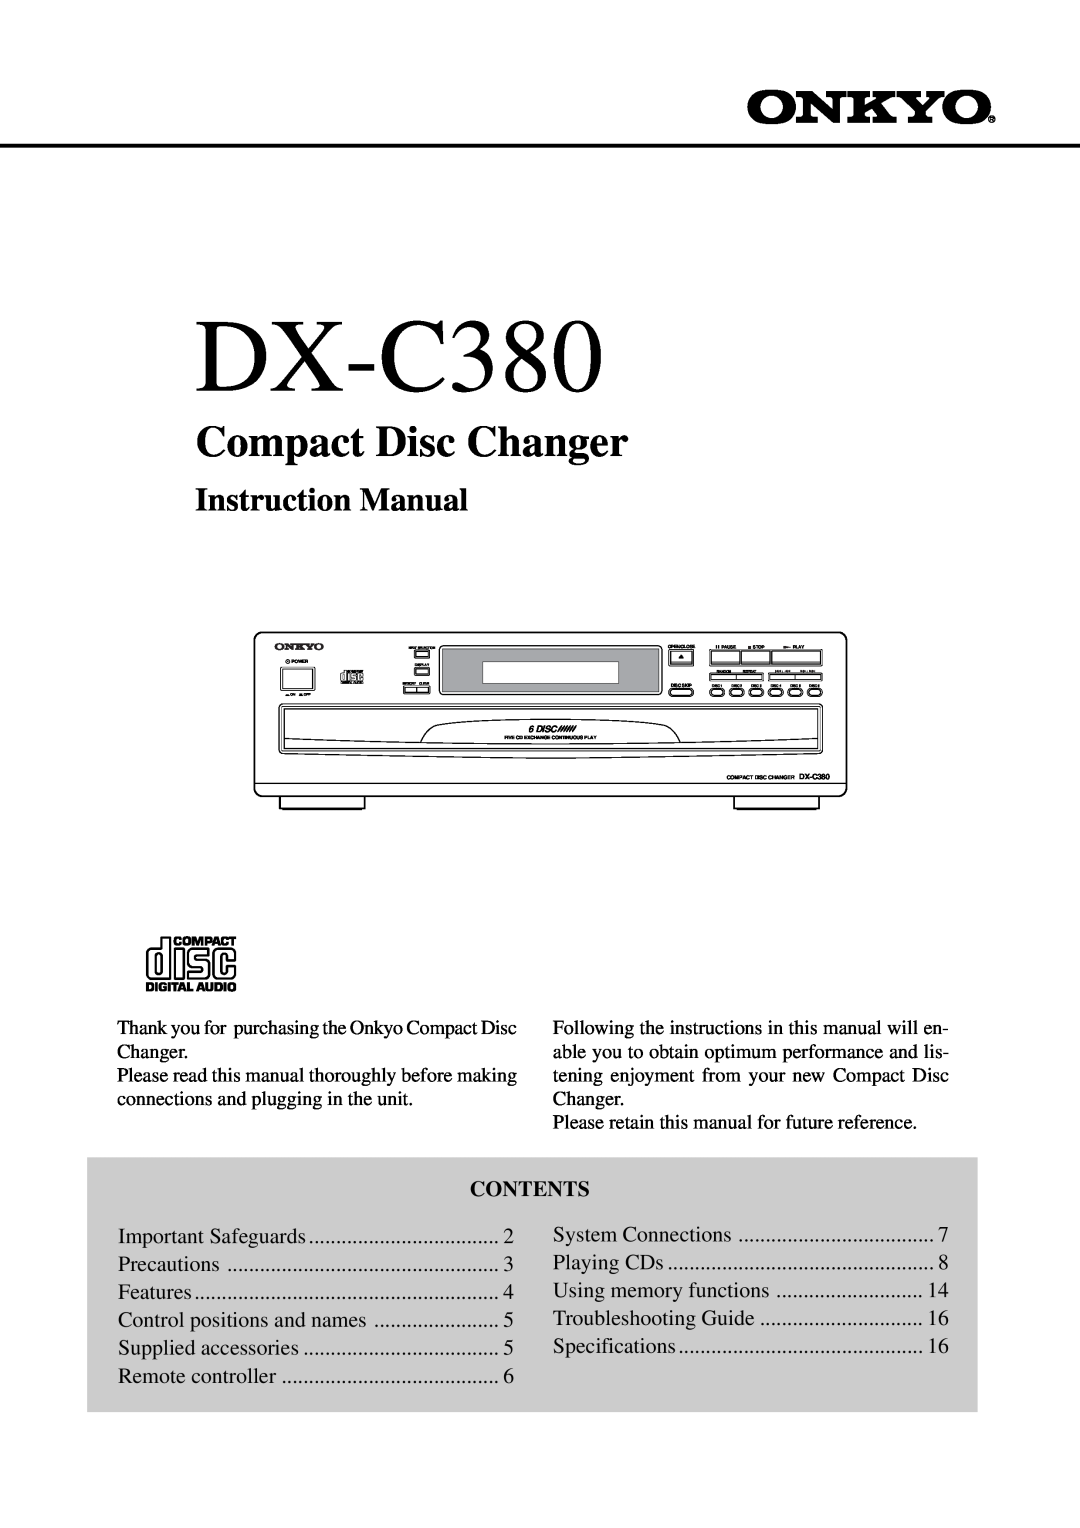 Onkyo DX-C380 instruction manual Compact Disc Changer, Contents 